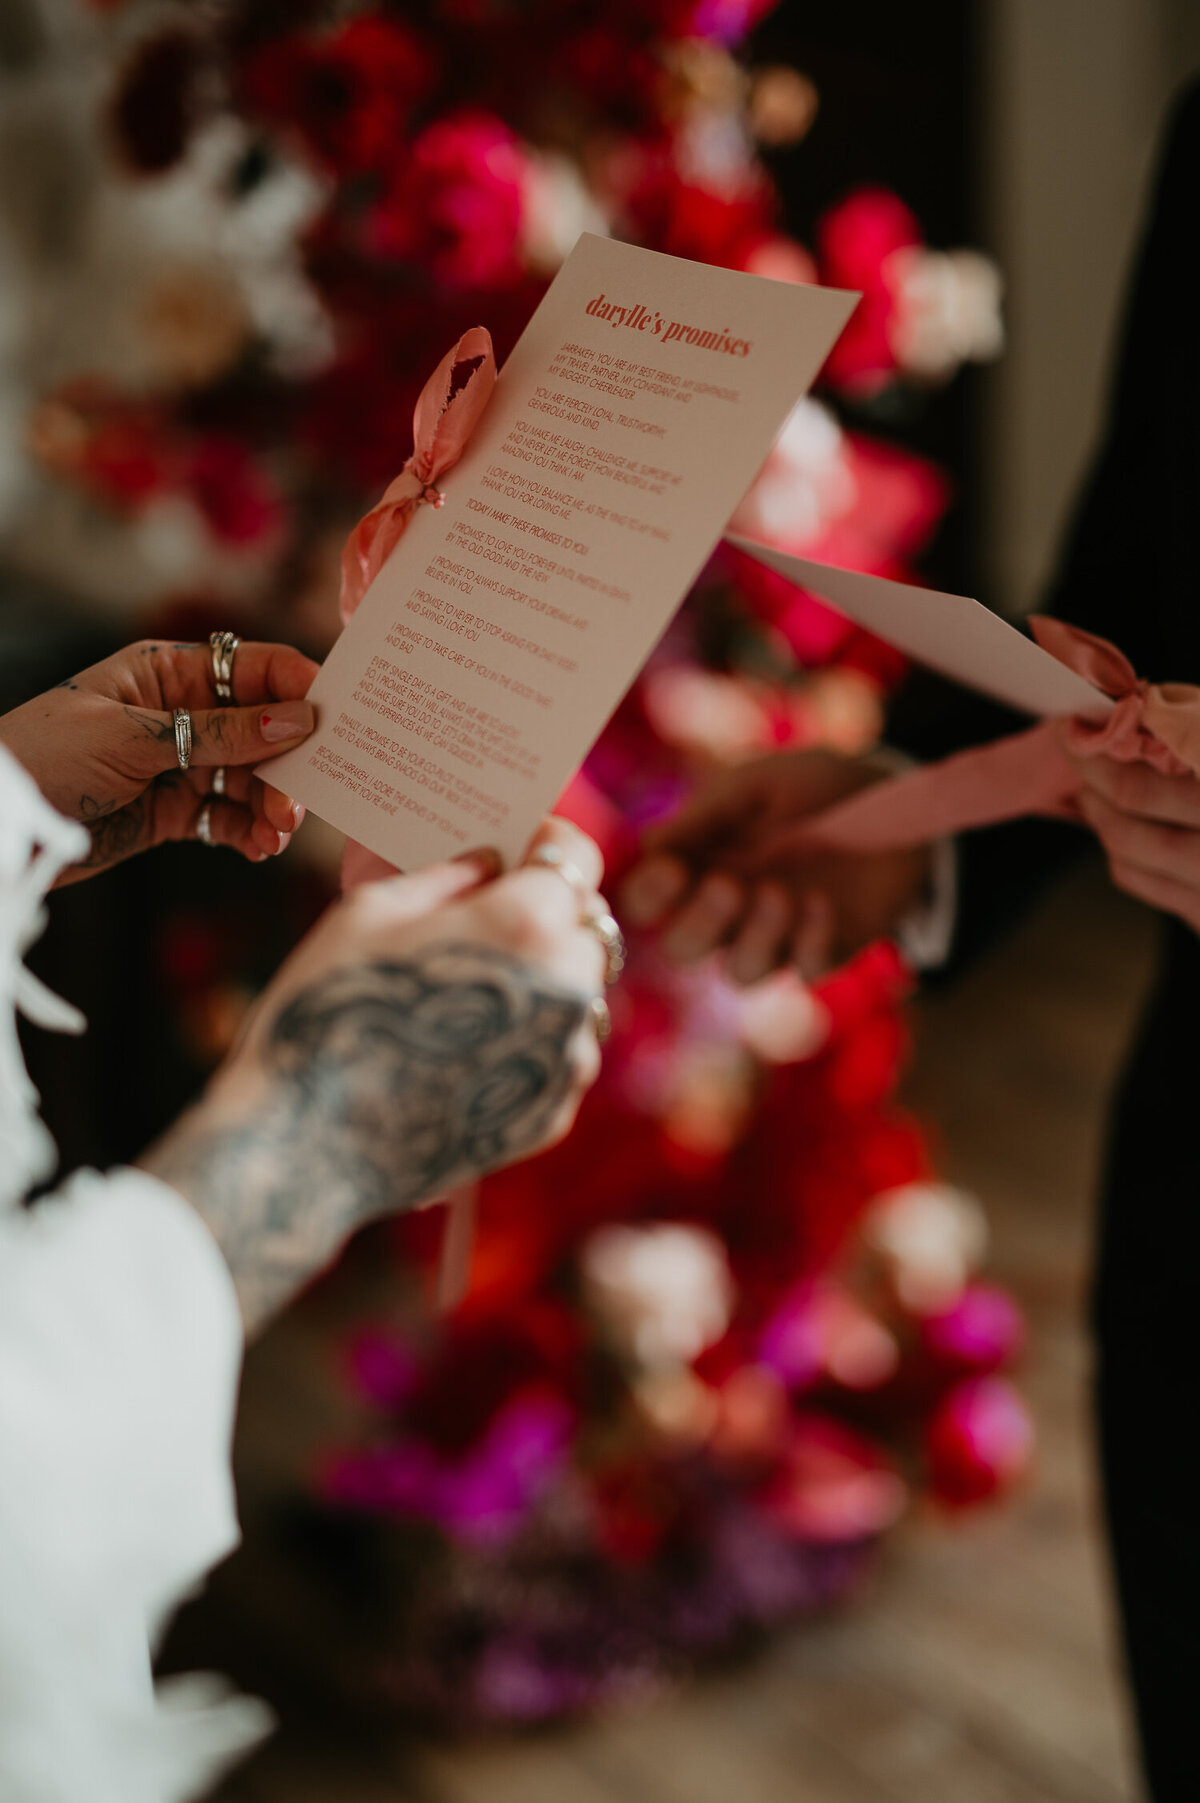 A couple share promises, a tattooed bride holds a card with her promises to her husband.